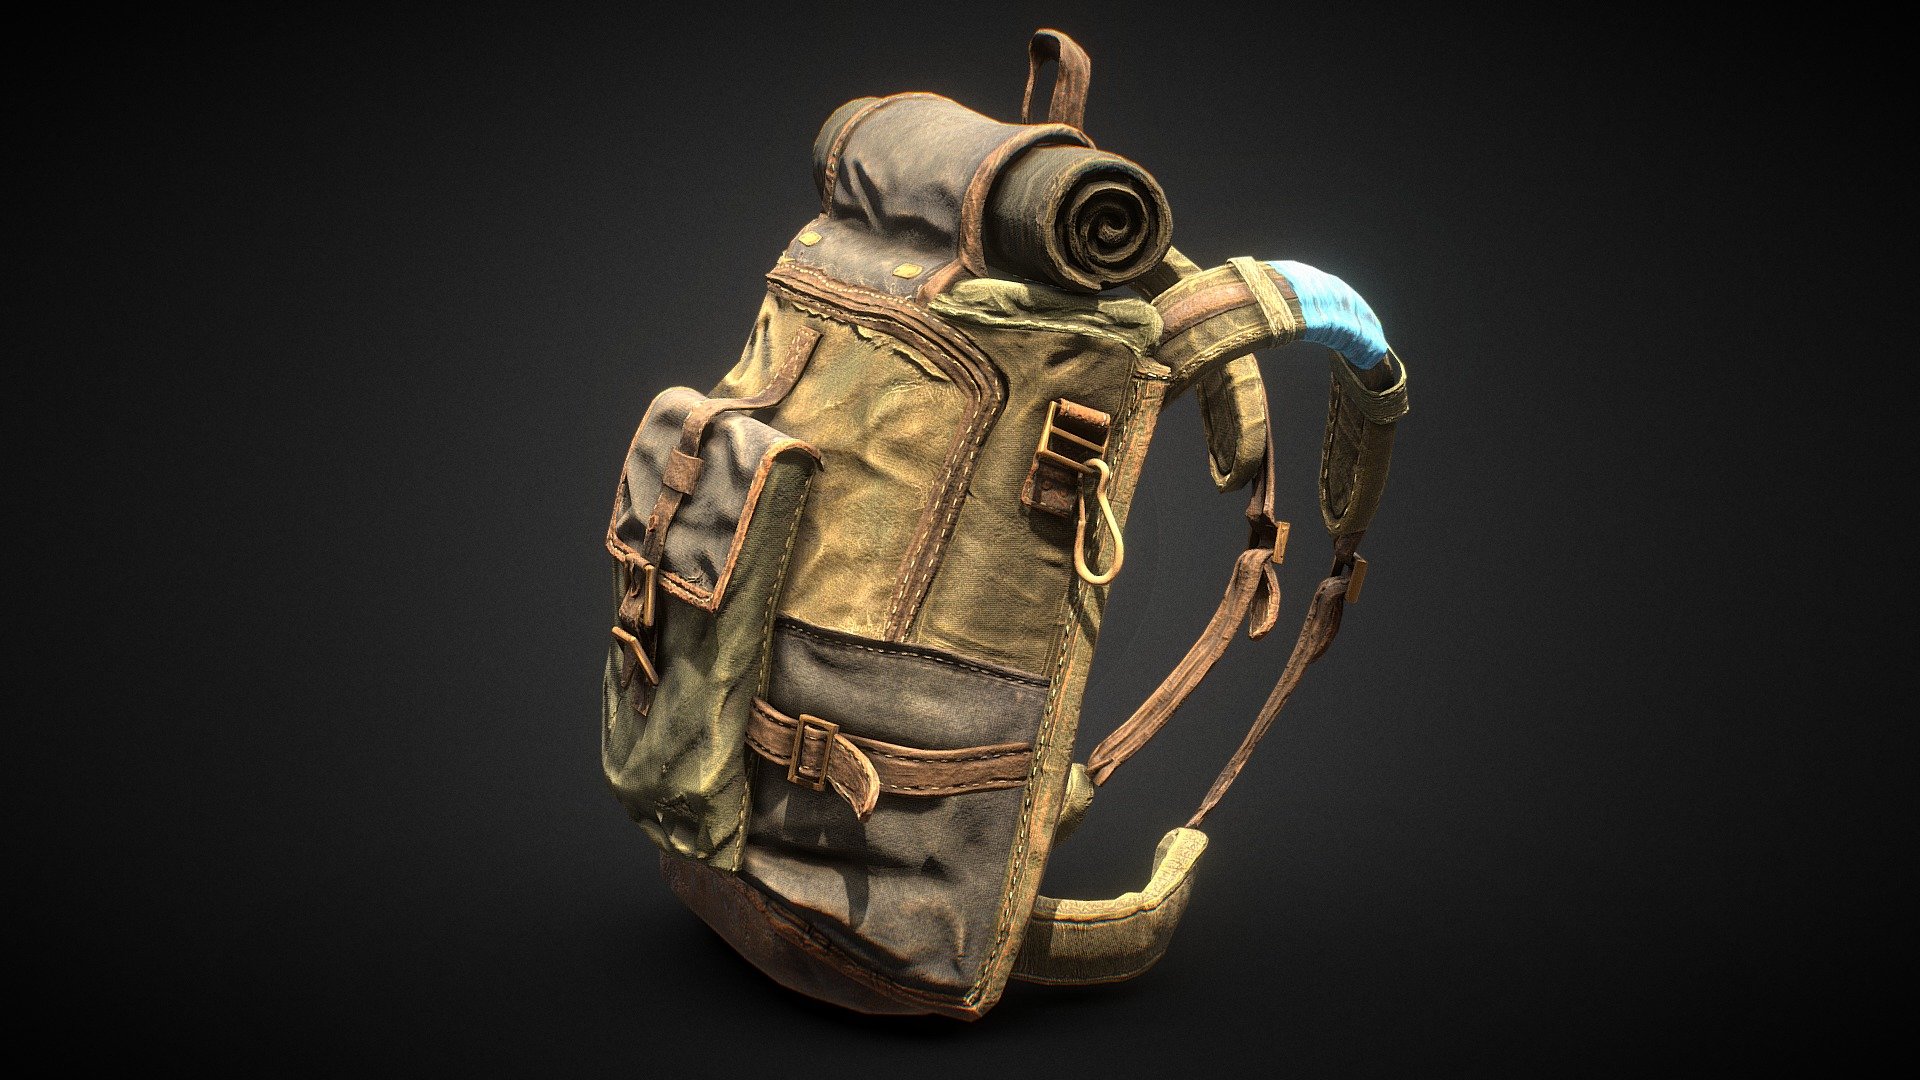 Game Ready asset modeled using Maya, and textured using Substance Painter 3d model